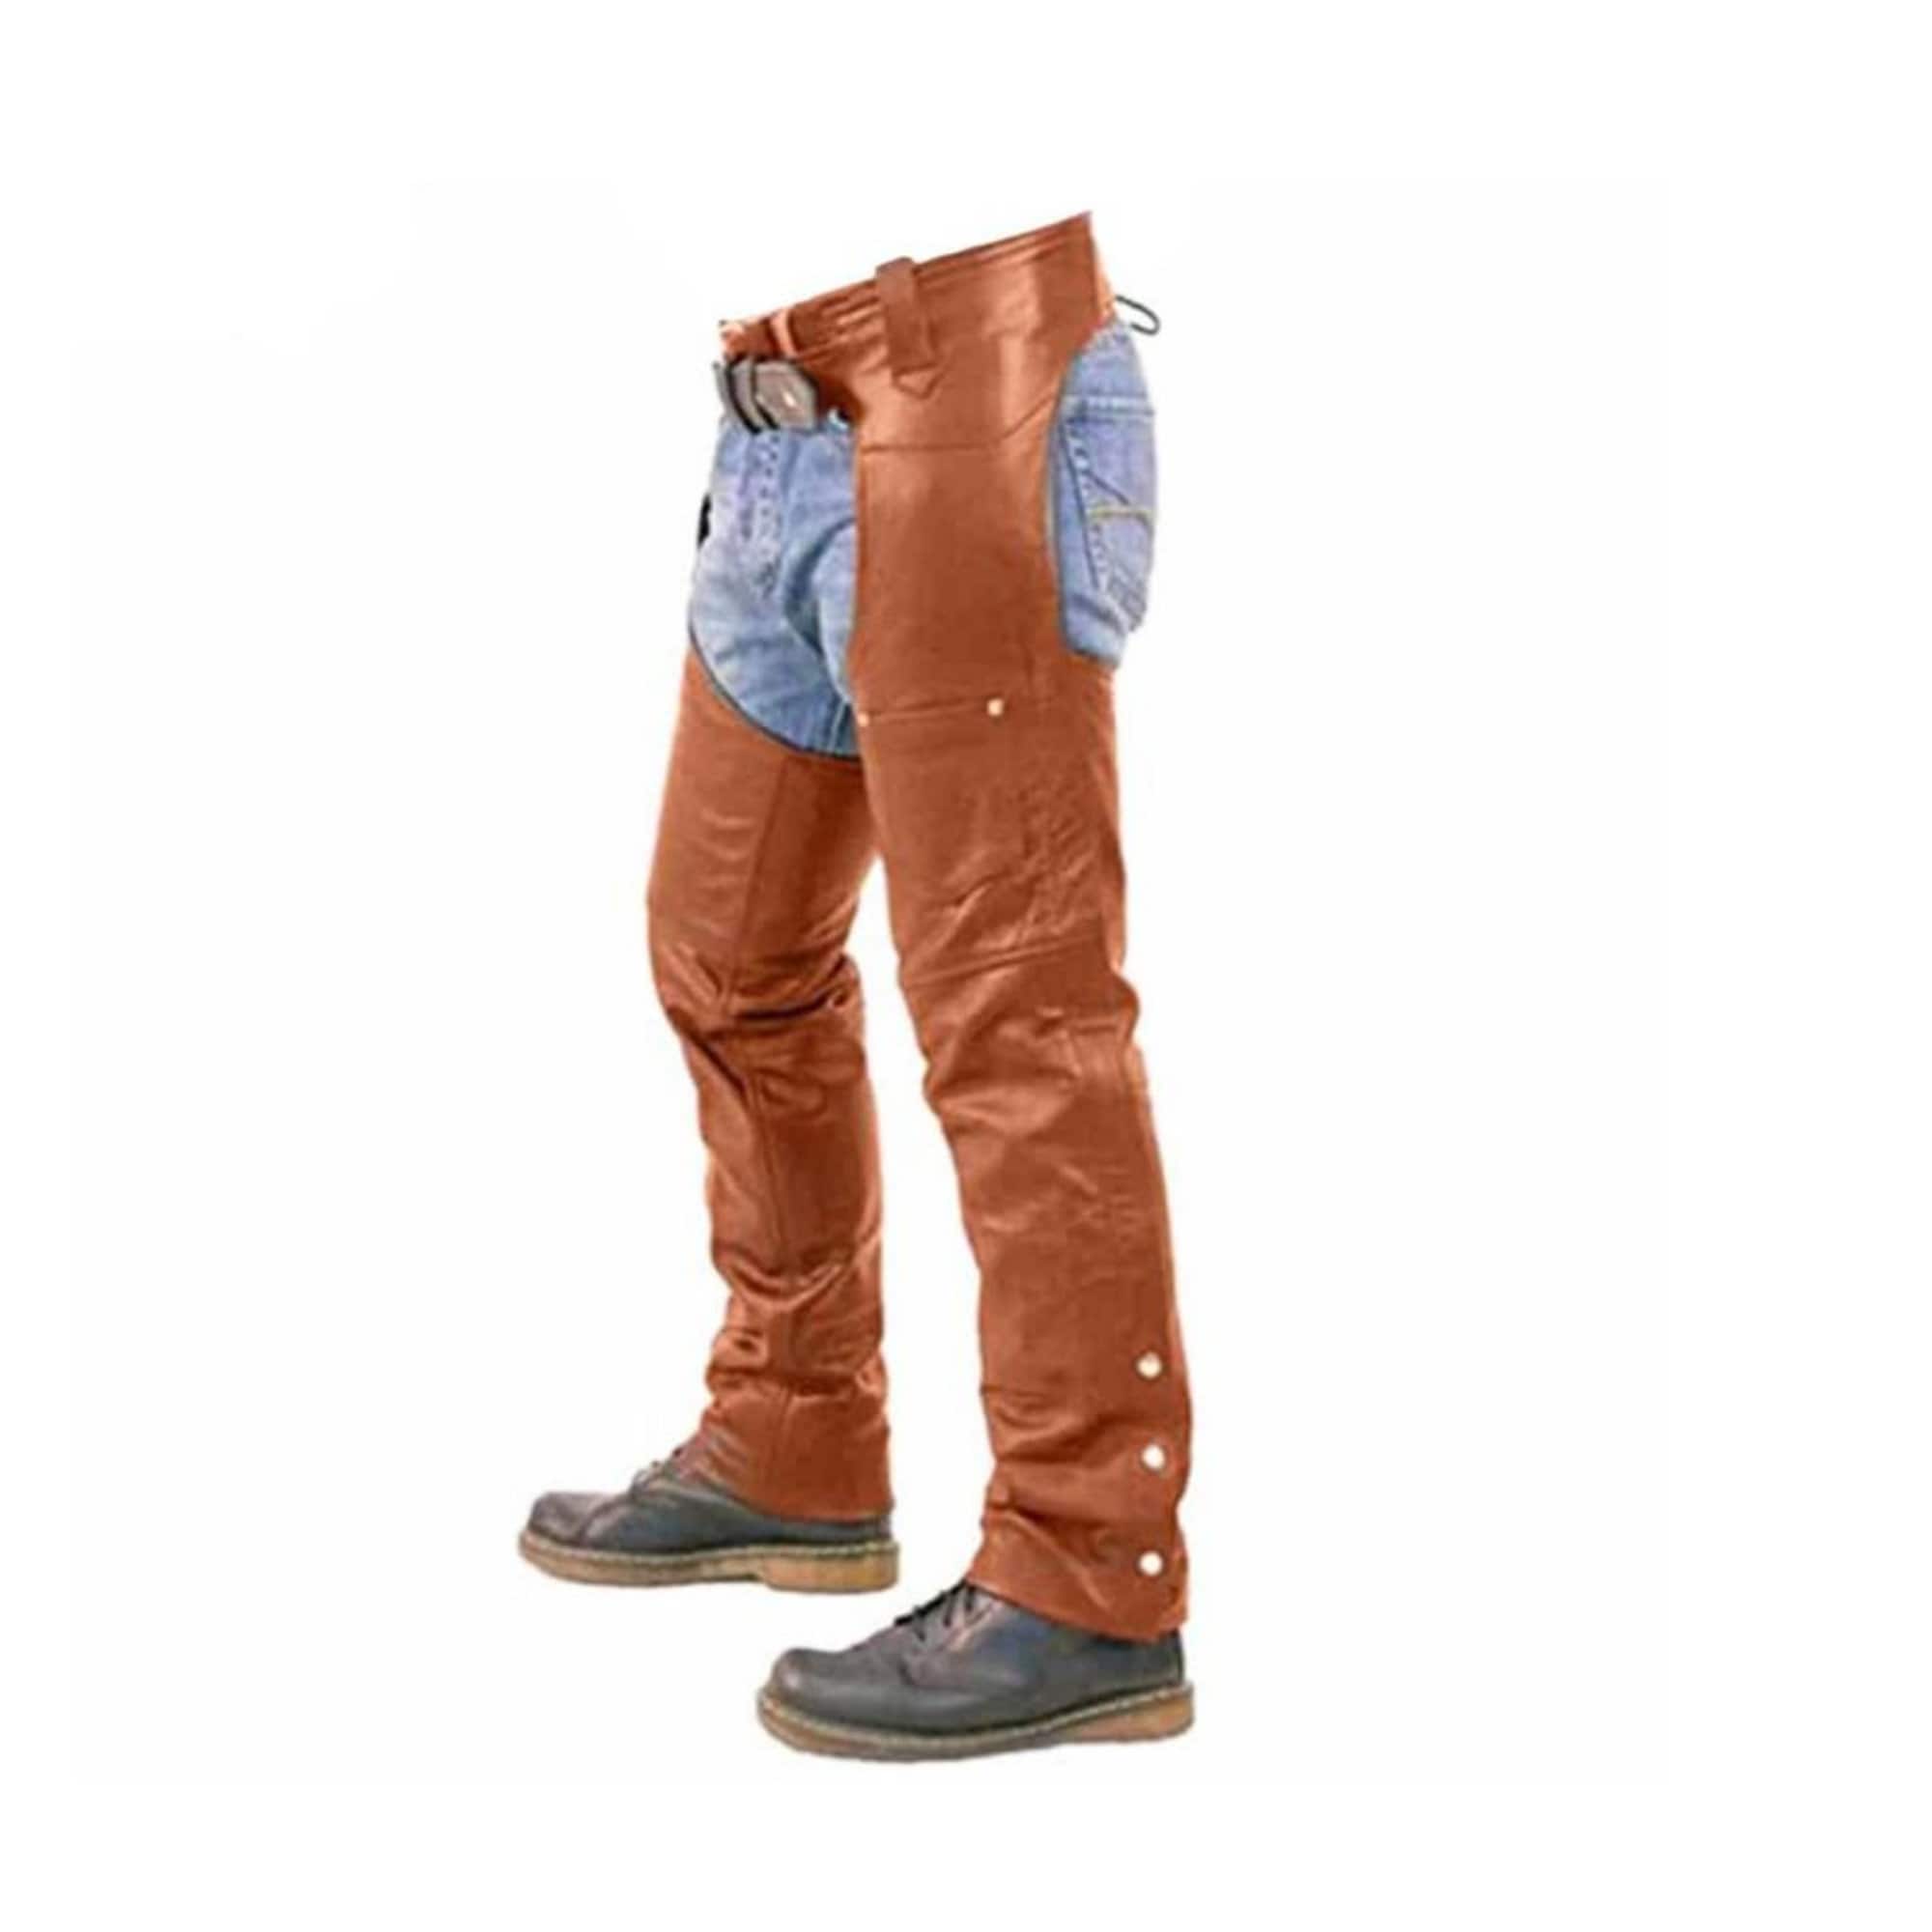 Used Leather Chaps For Sale | lupon.gov.ph